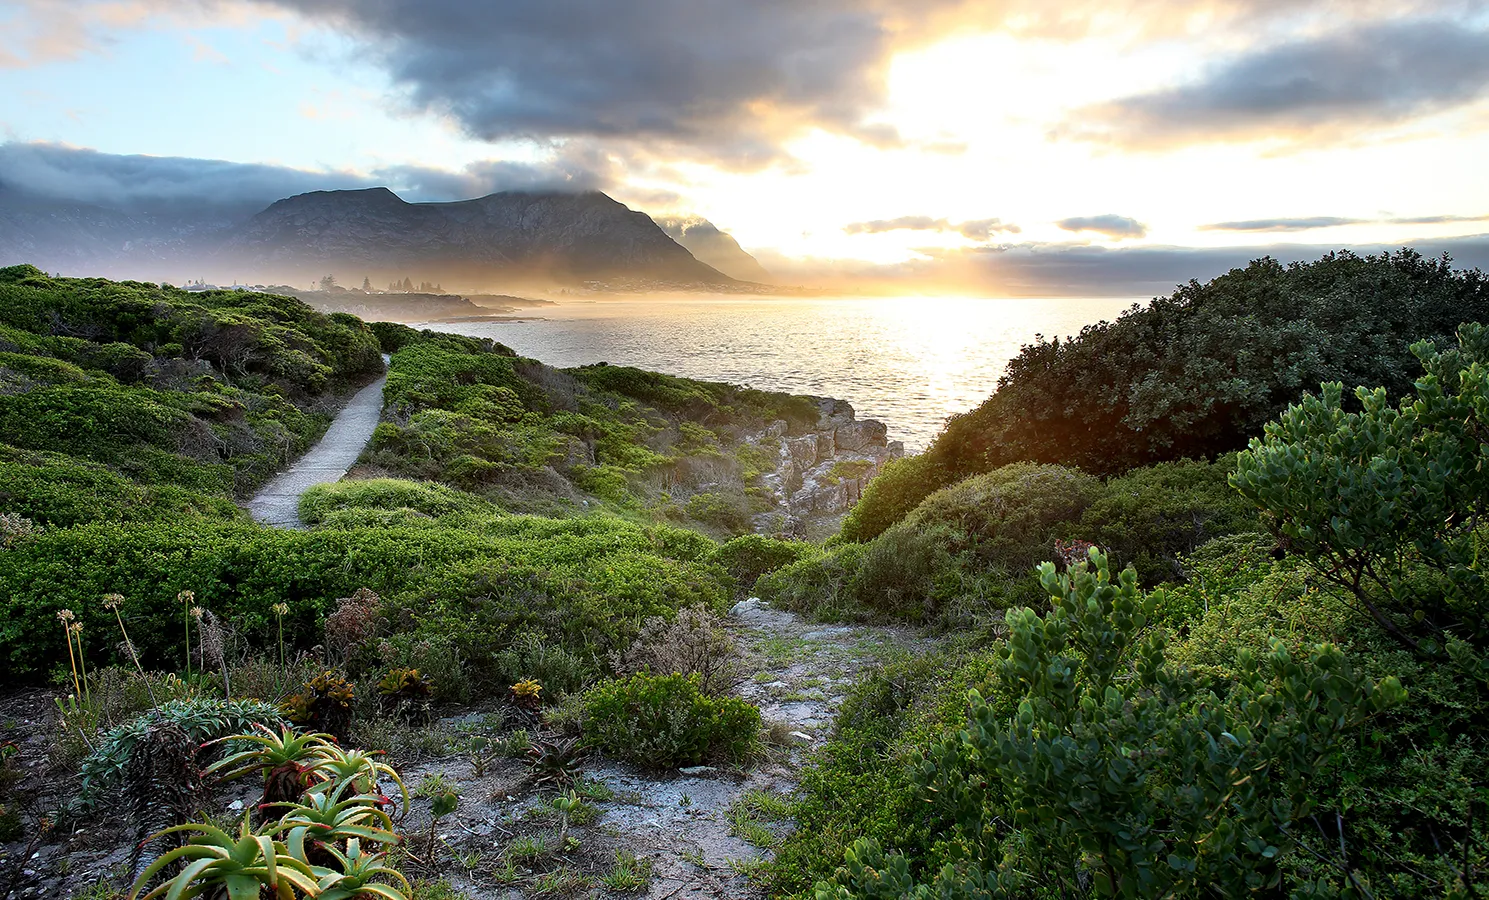 The cliffside path extends along the shoreline of Hermanus towards Grotto Beach where the Overberg mountains meet this magnificent sweep of Walker Bay.